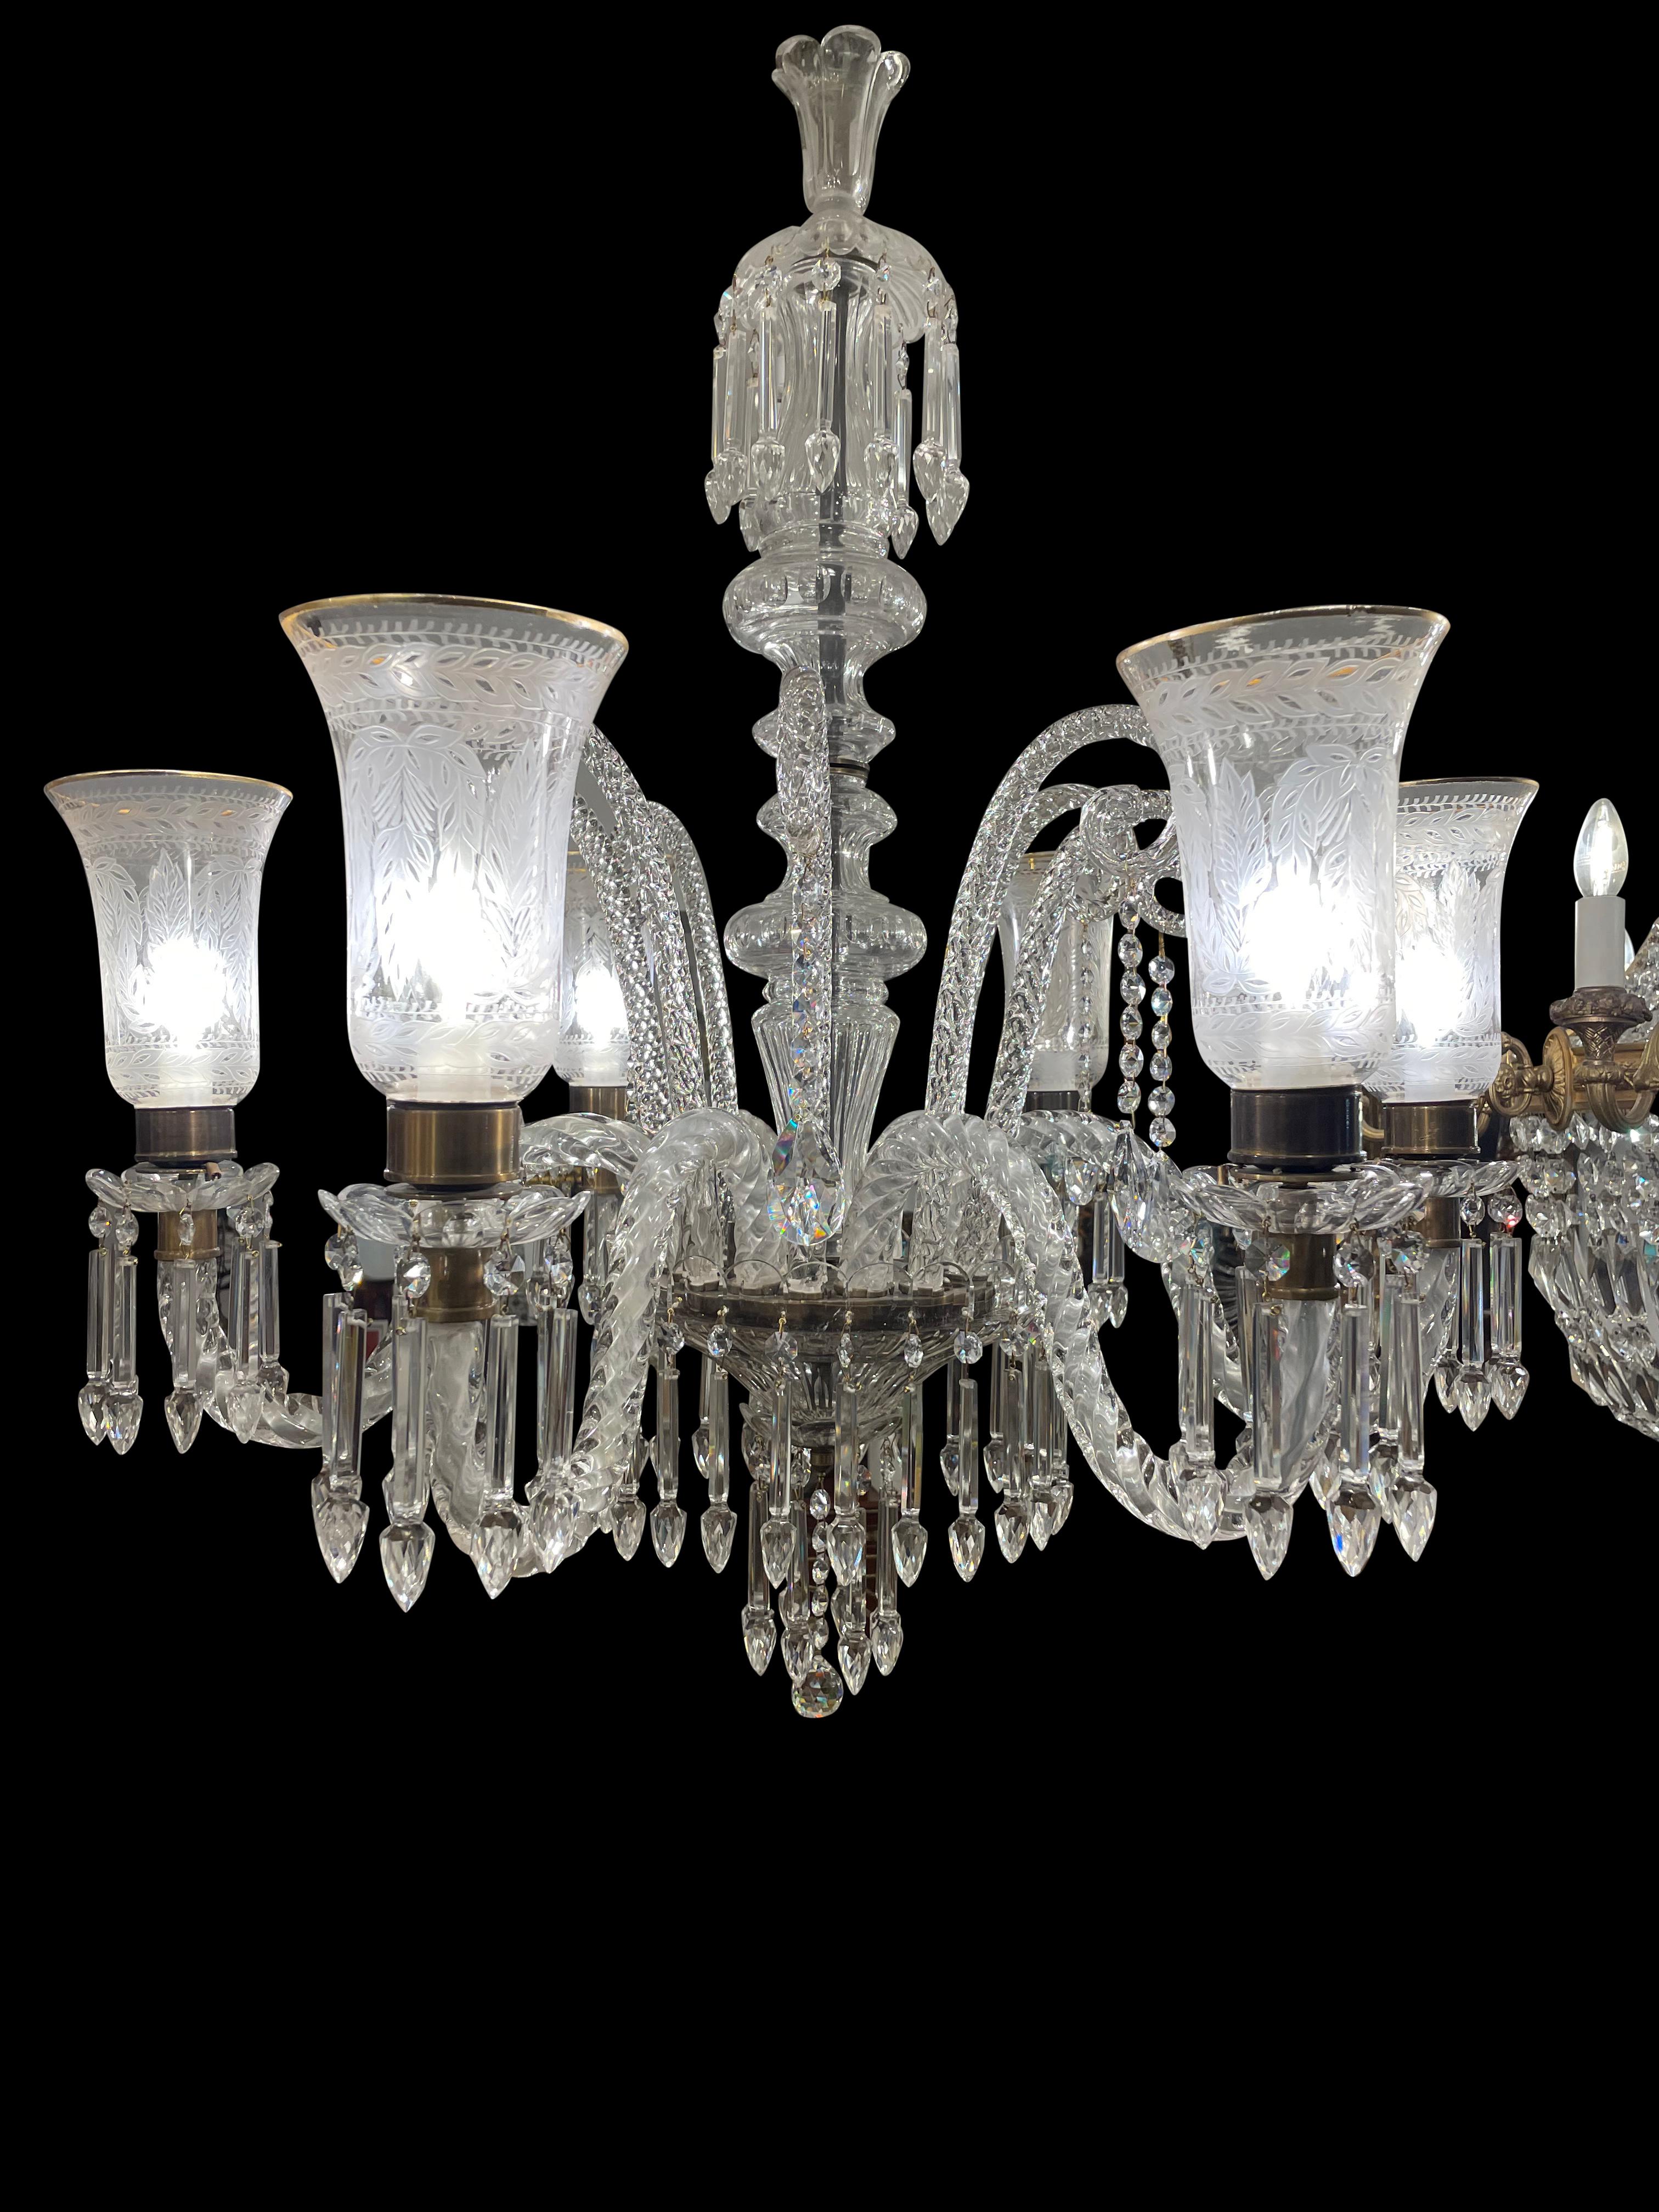 A fine cut crystal chandelier with engraved hurricane shades, 20th century. 

A 20th century cut crystal chandelier of the highest quality, likely made by the firm of either Osler of Birmingham, Blades or Waterford. Every piece of this chandelier